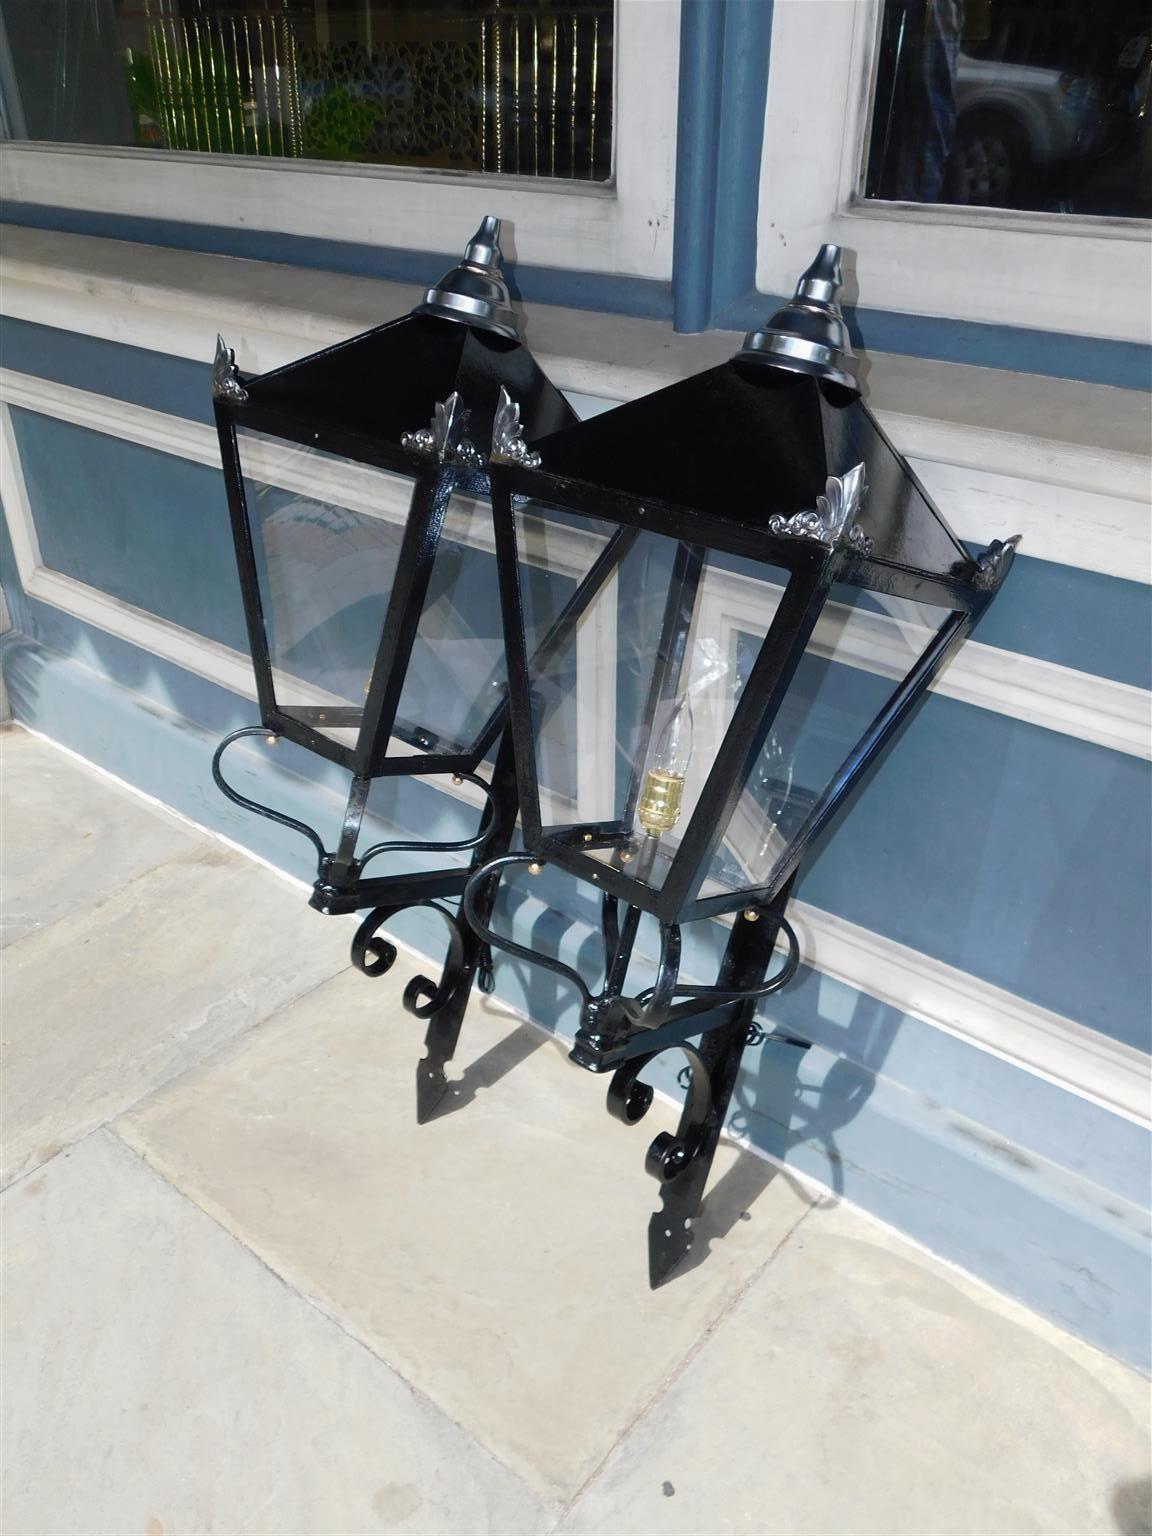 American Empire Pair of American Wrought Iron and Spelter Finial Mounted Wall Lanterns, C. 1850 For Sale